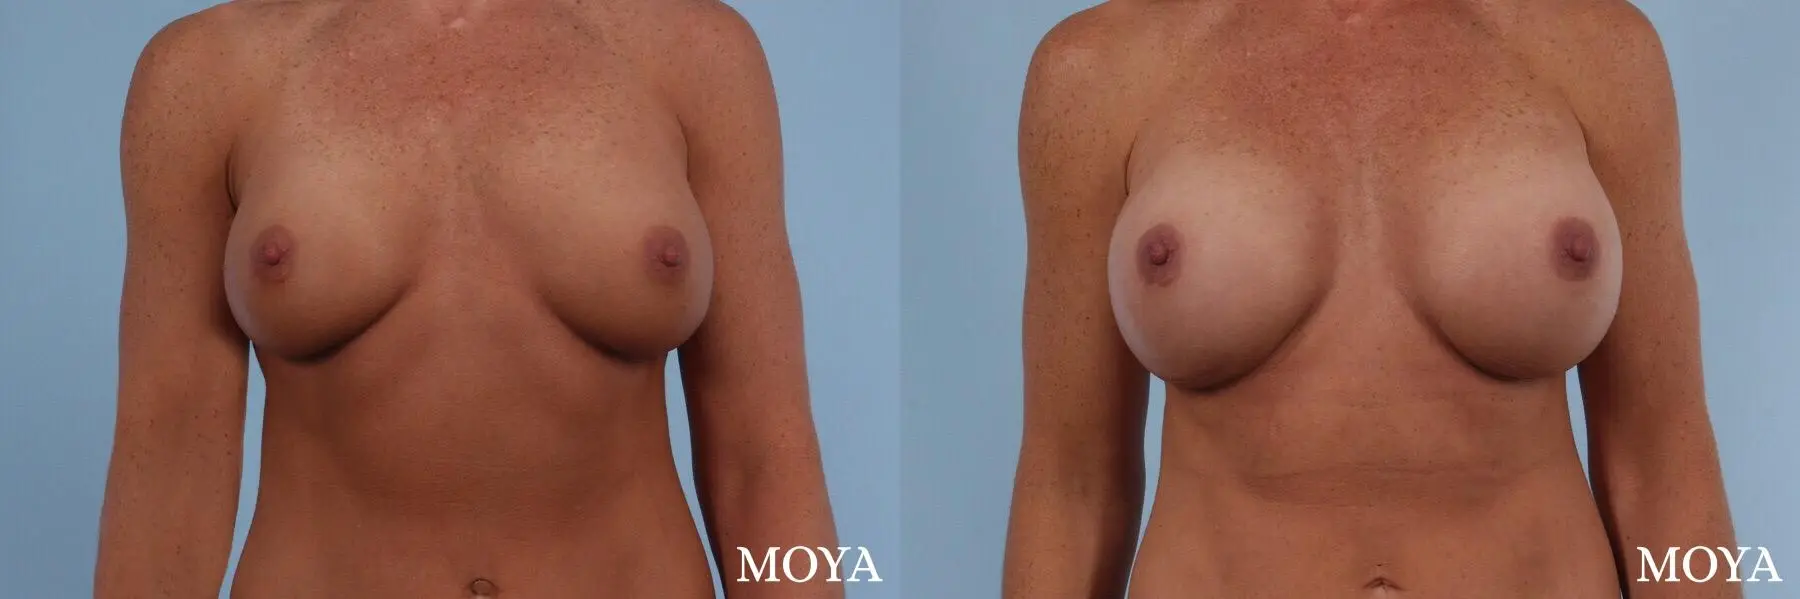 Breast Implant Exchange: Patient 3 - Before and After 1